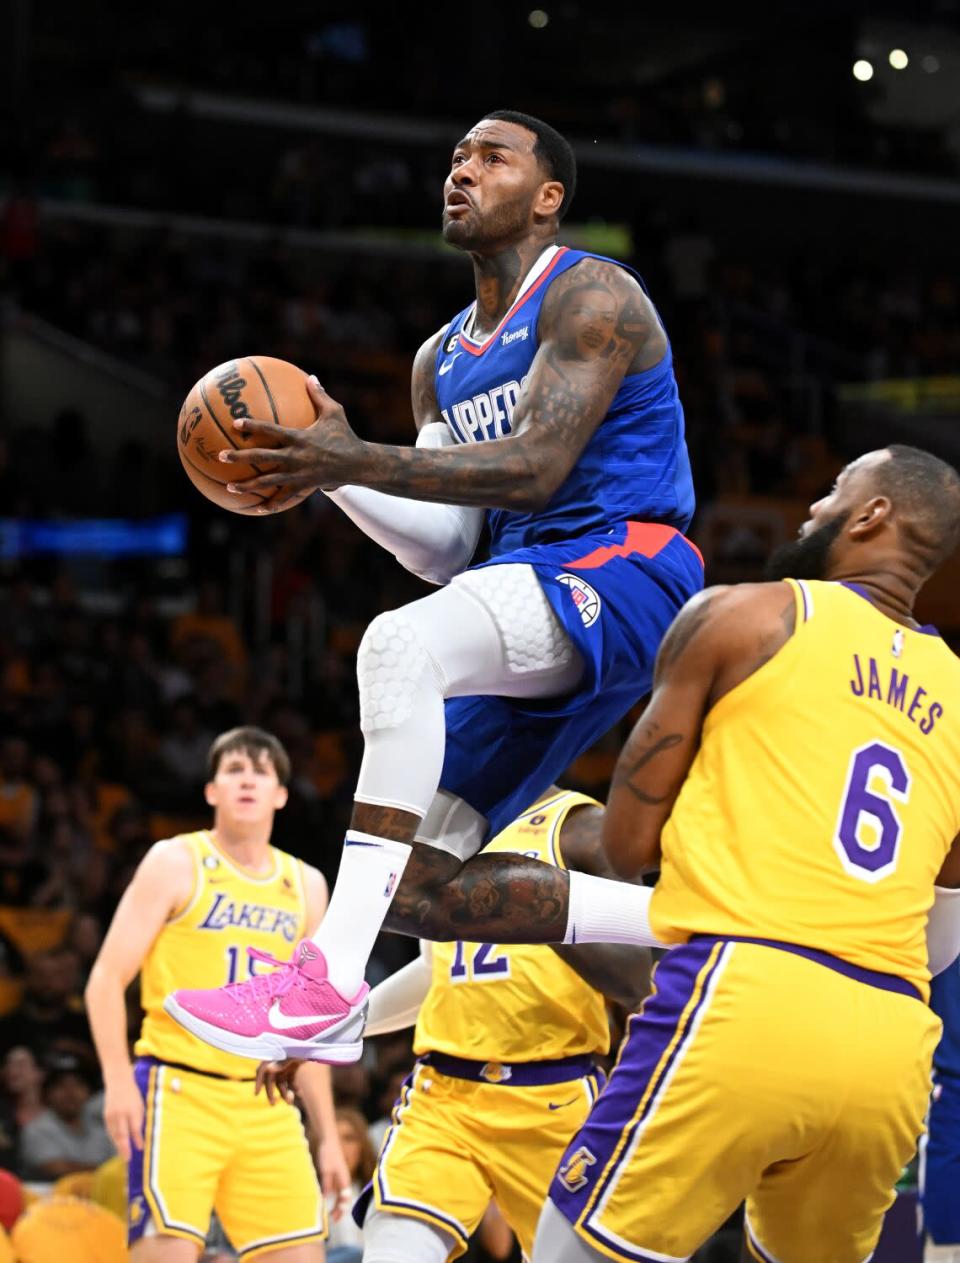 Clippers guard John Wall drives through the Lakers defense to score in the second quarter Thursday.